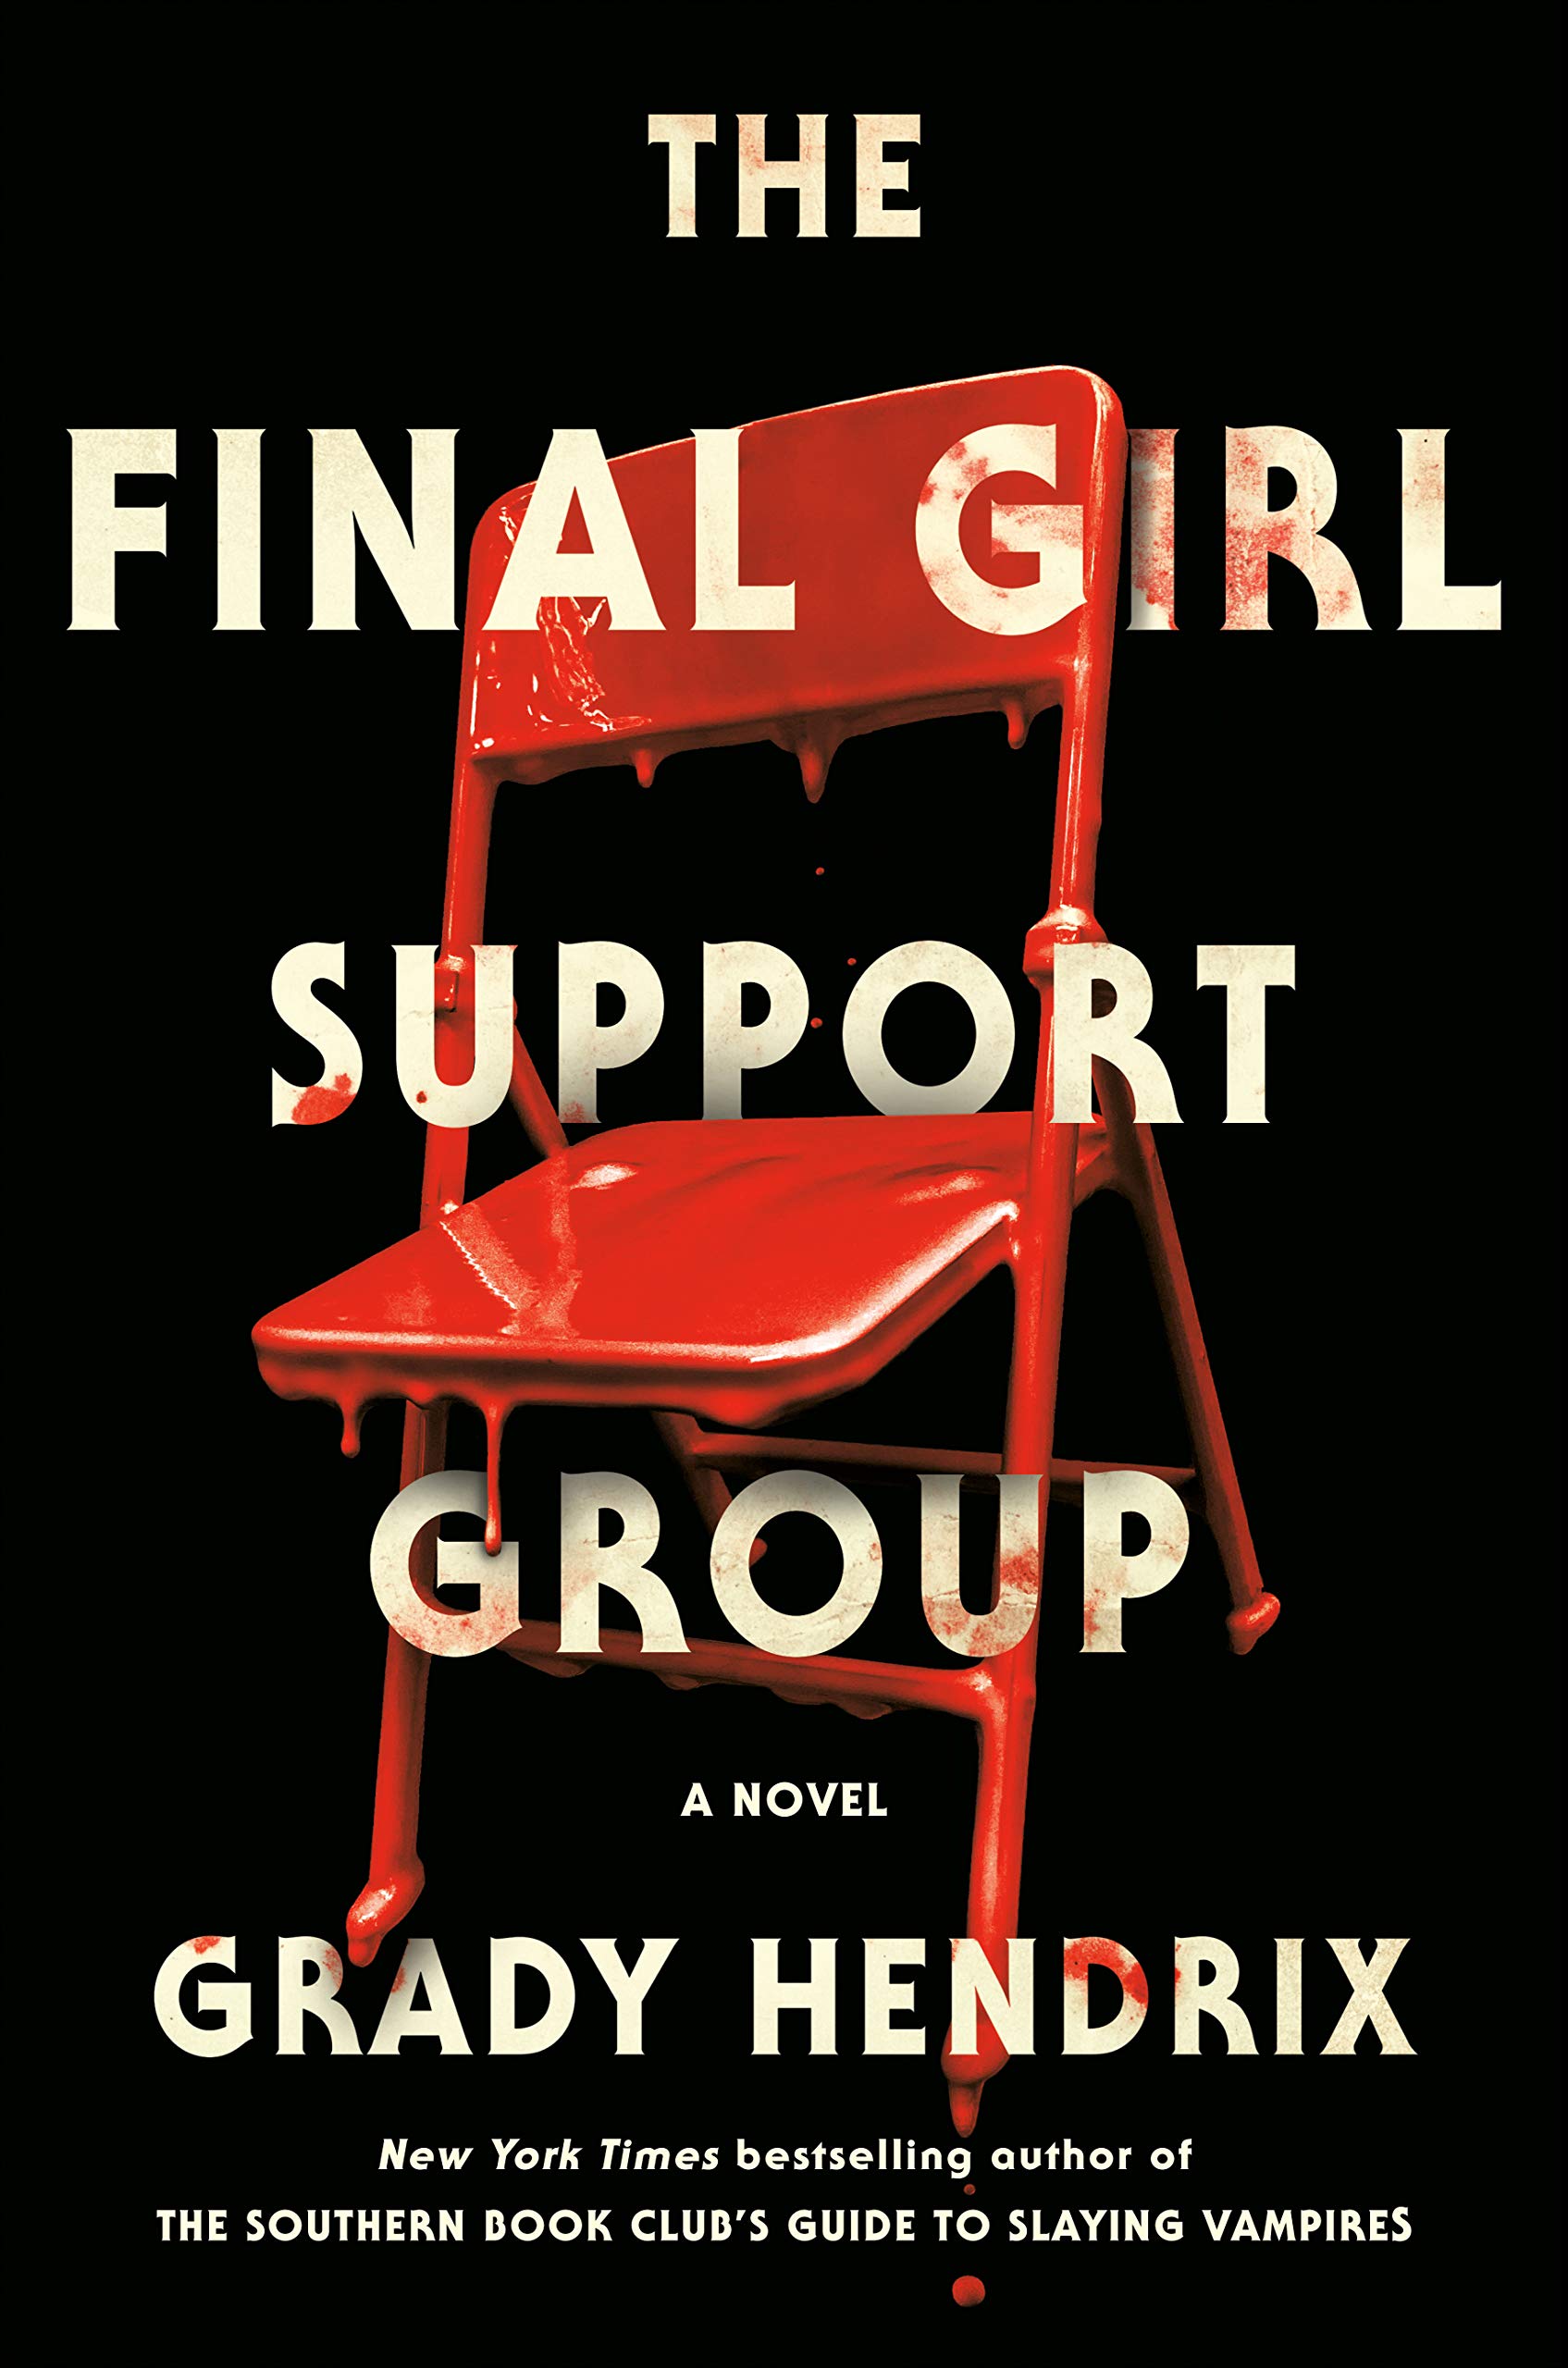 Cover of The Final Girl Support Group; a folding chair covered in blood against a black bakcground.